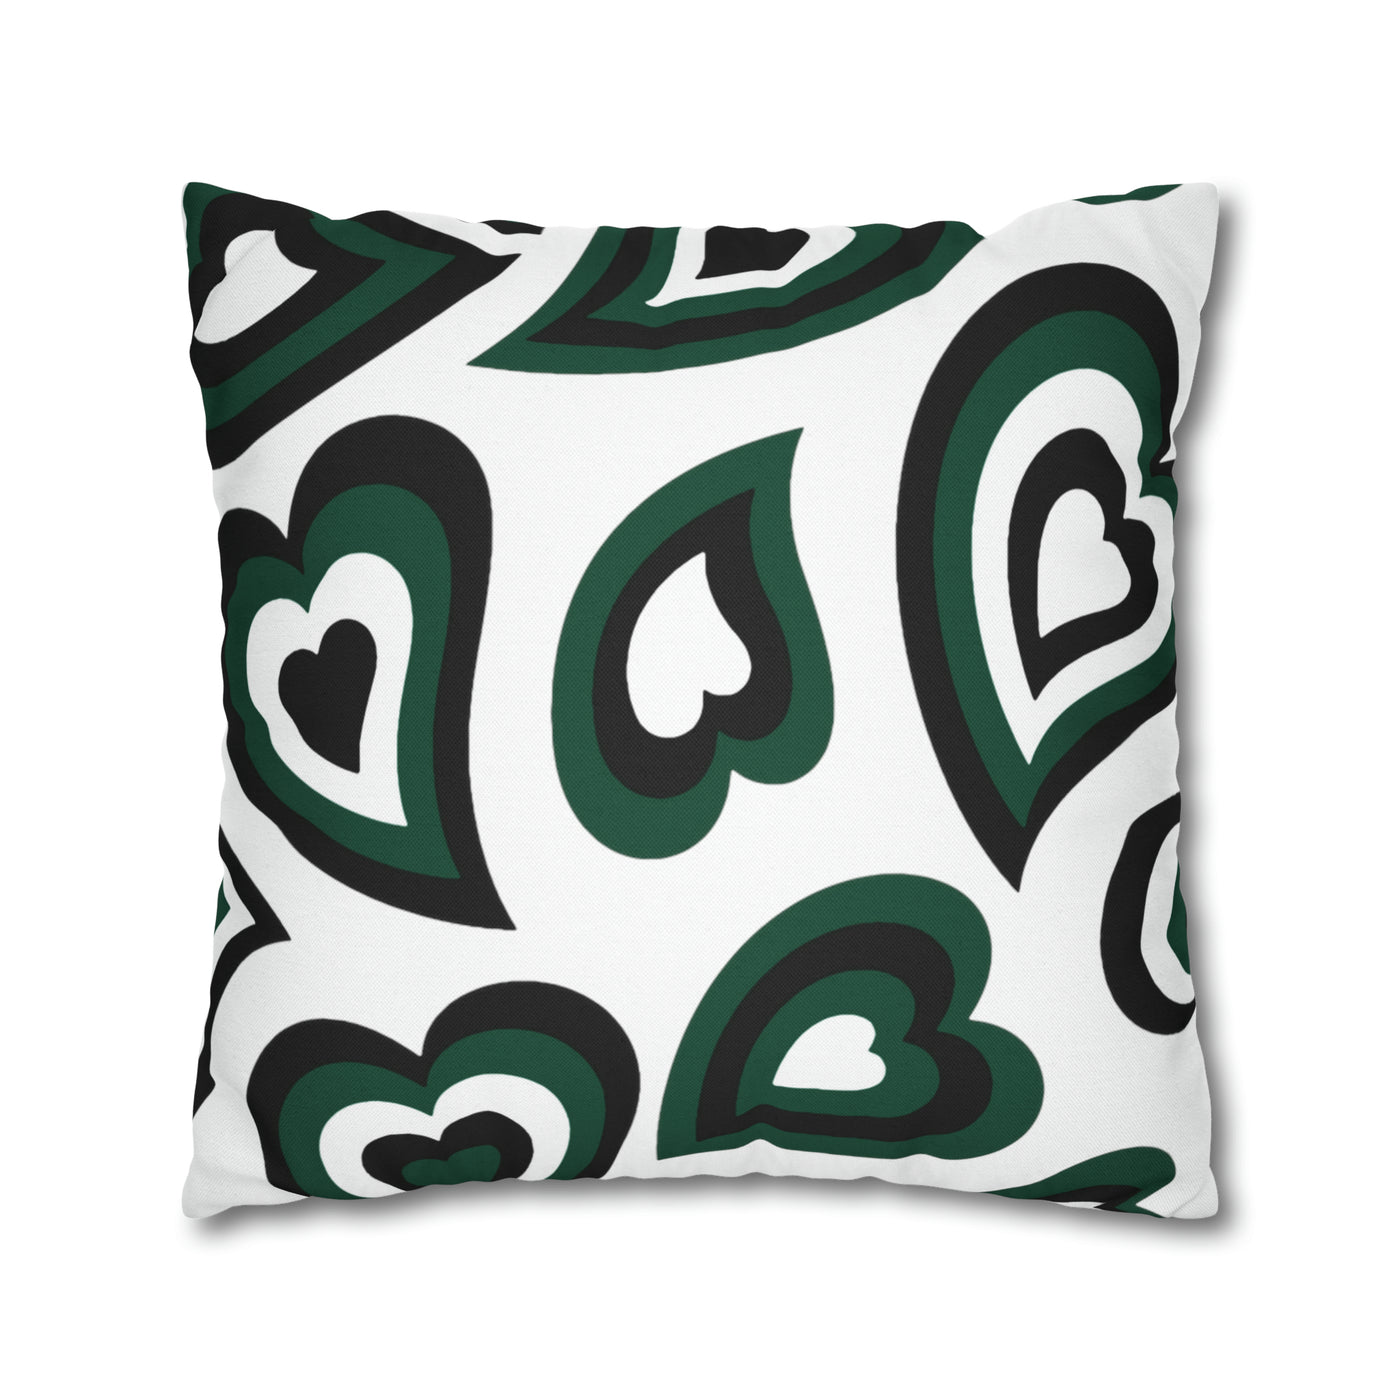 Retro Heart Pillow - Green and Black, Heart Pillow, Hearts, Valentine's Day, Michigan State, Bed Party Pillow, Sleepaway Camp Pillow, Camp